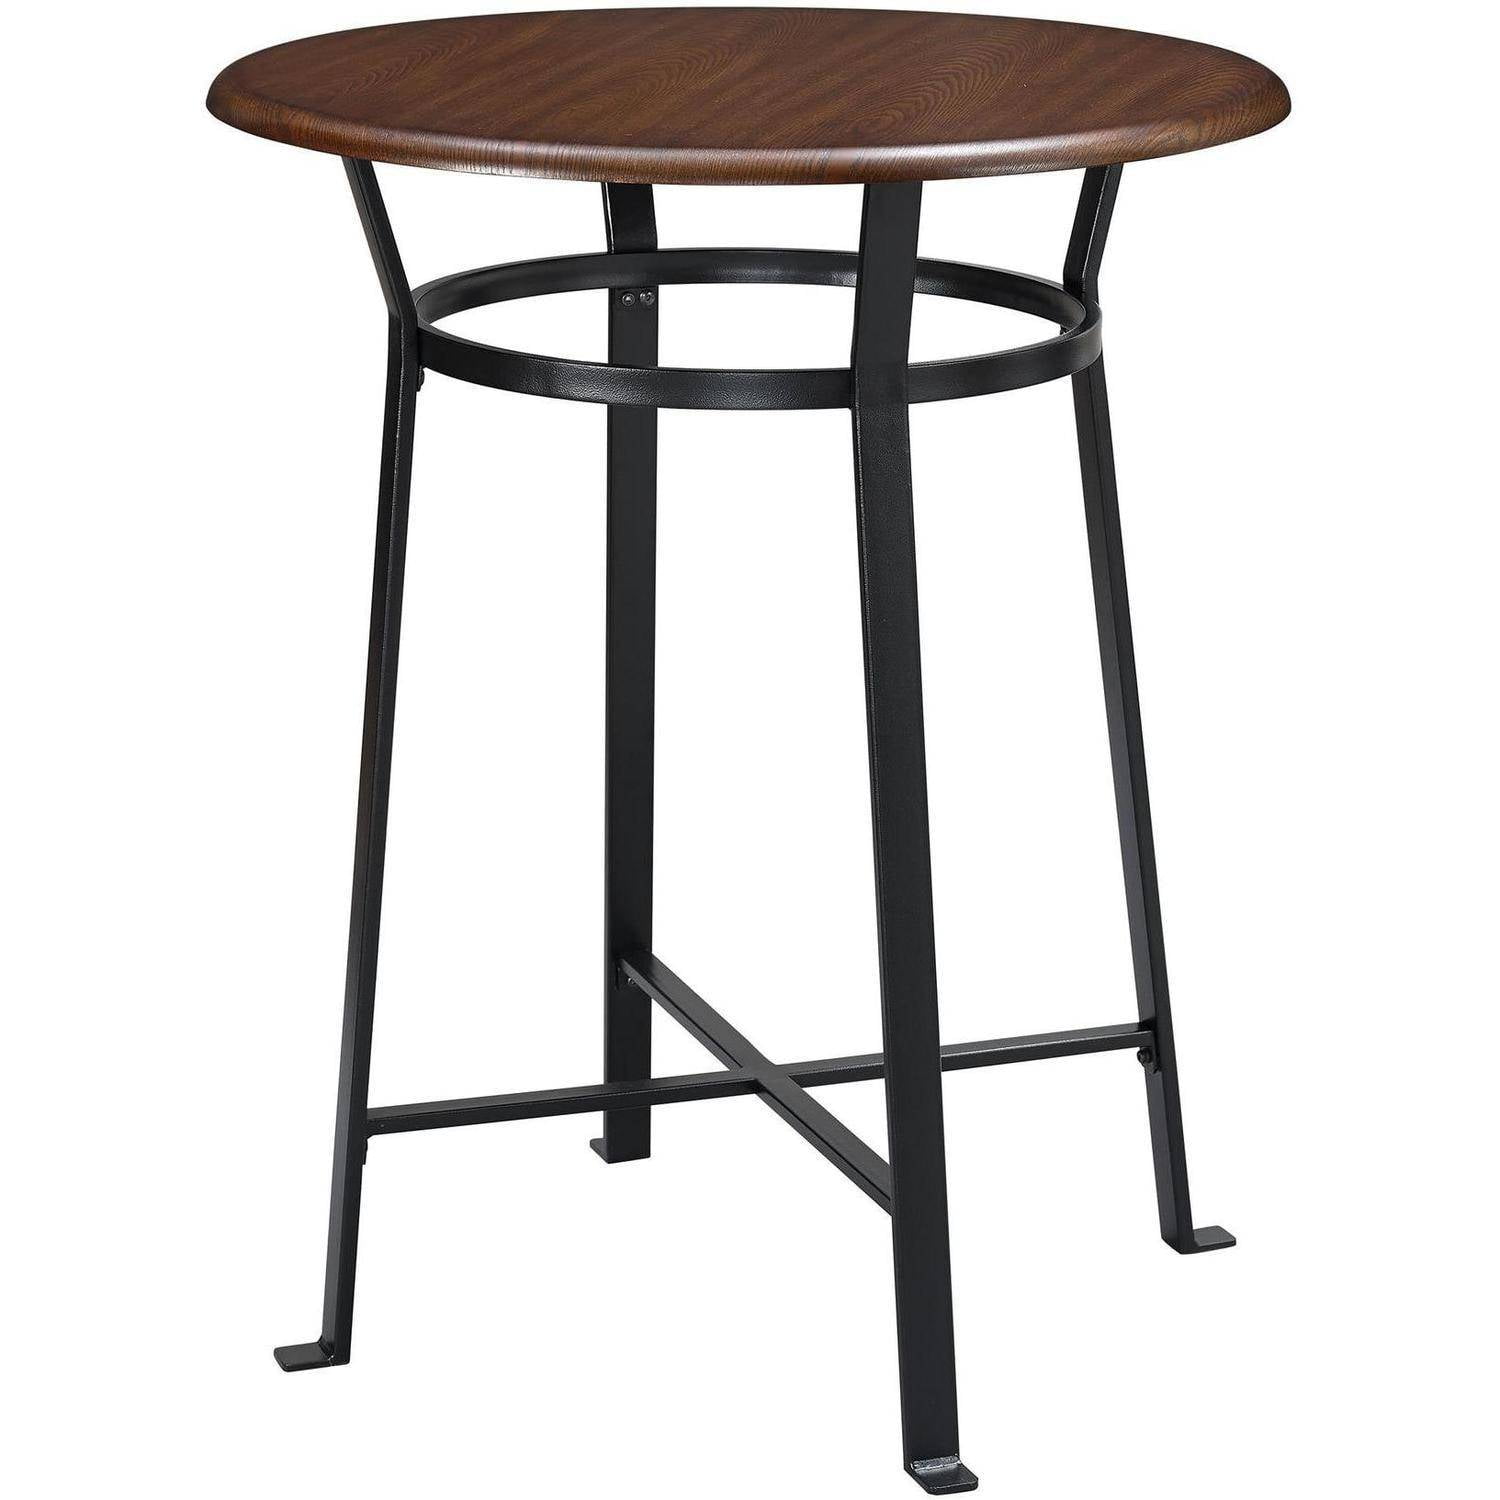 Small Dining Table set Tall Bistro 2 Person Kitchen Pub Height and ...